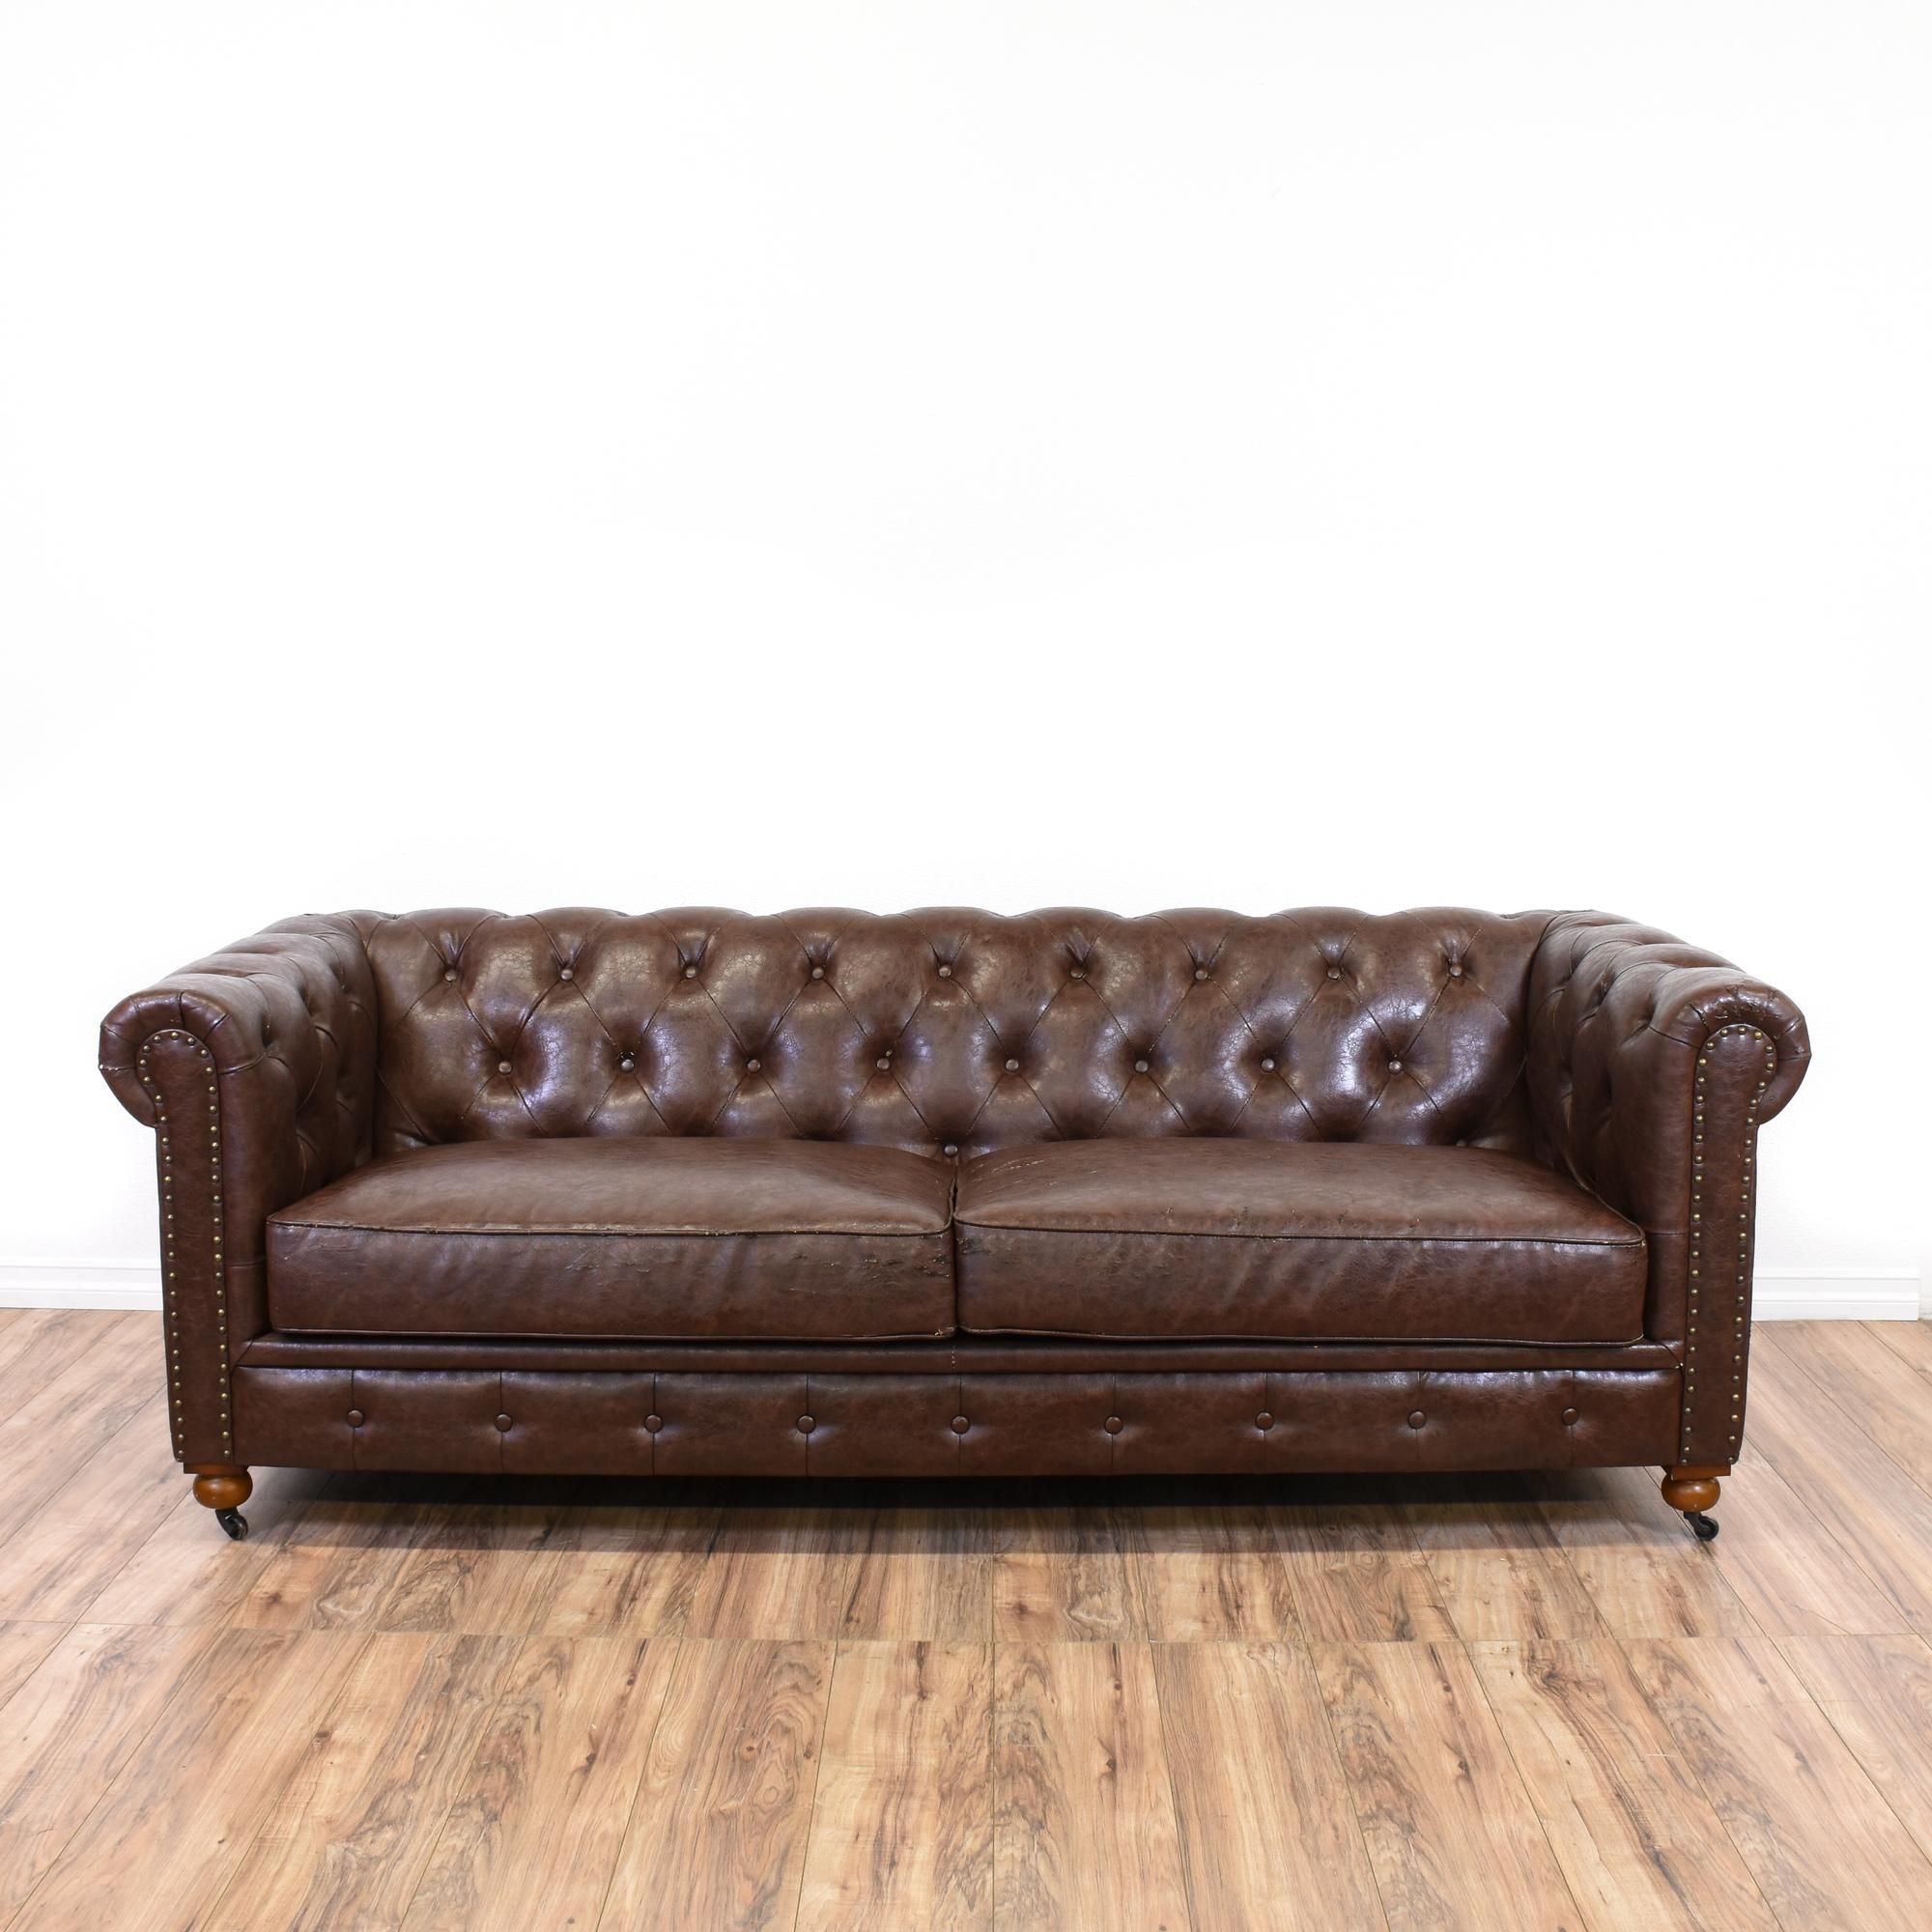 This Chesterfield Sofa Is Upholstered In A Faux Brown Leather With A Within Faux Leather Sofas In Dark Brown (Gallery 9 of 20)